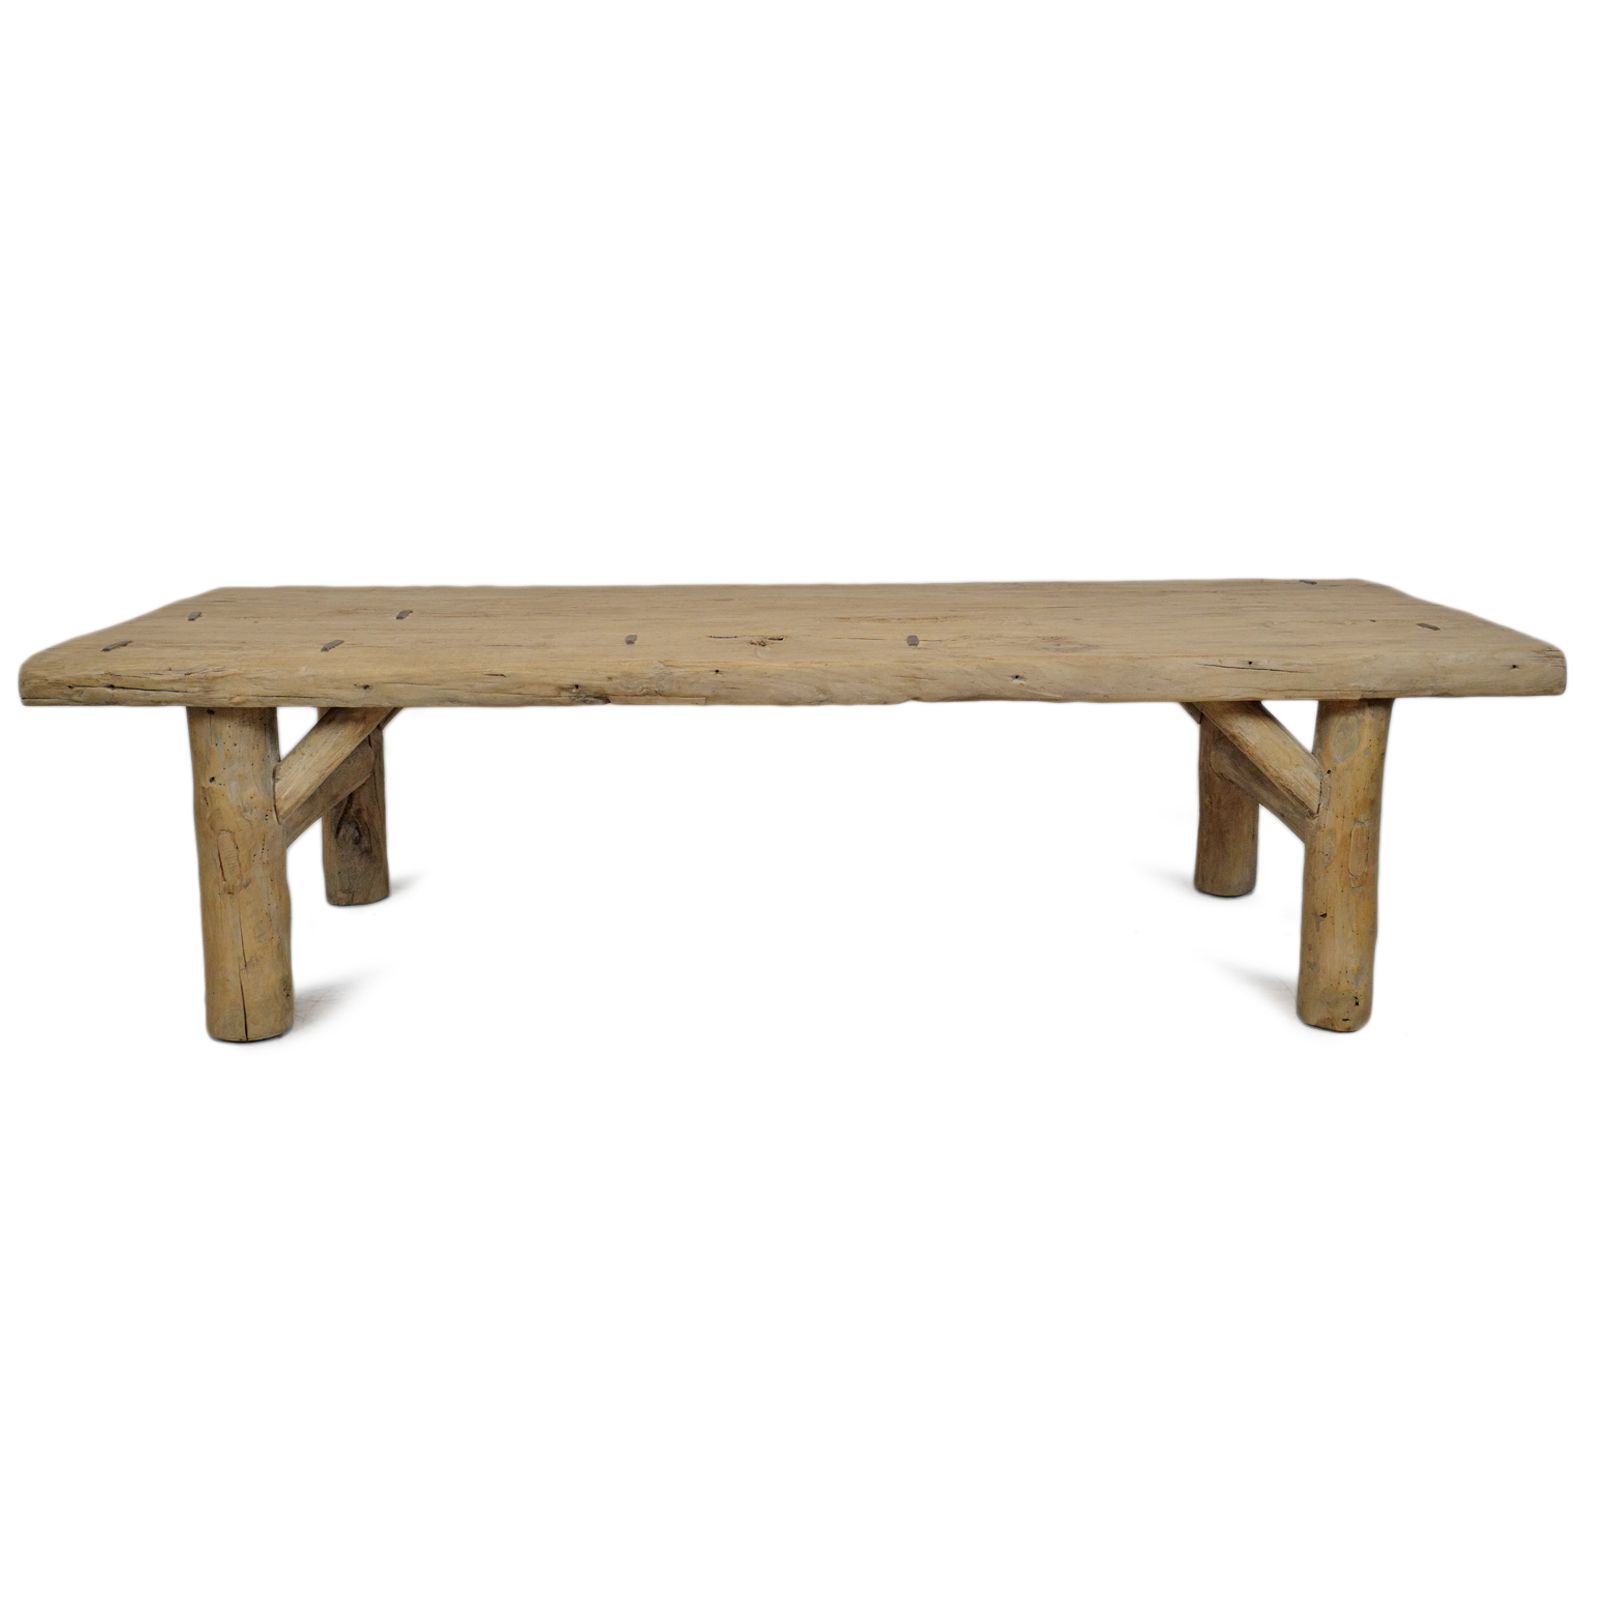 Design Mix Gallery In Most Recently Released Old Elm Outdoor Tables (View 13 of 15)